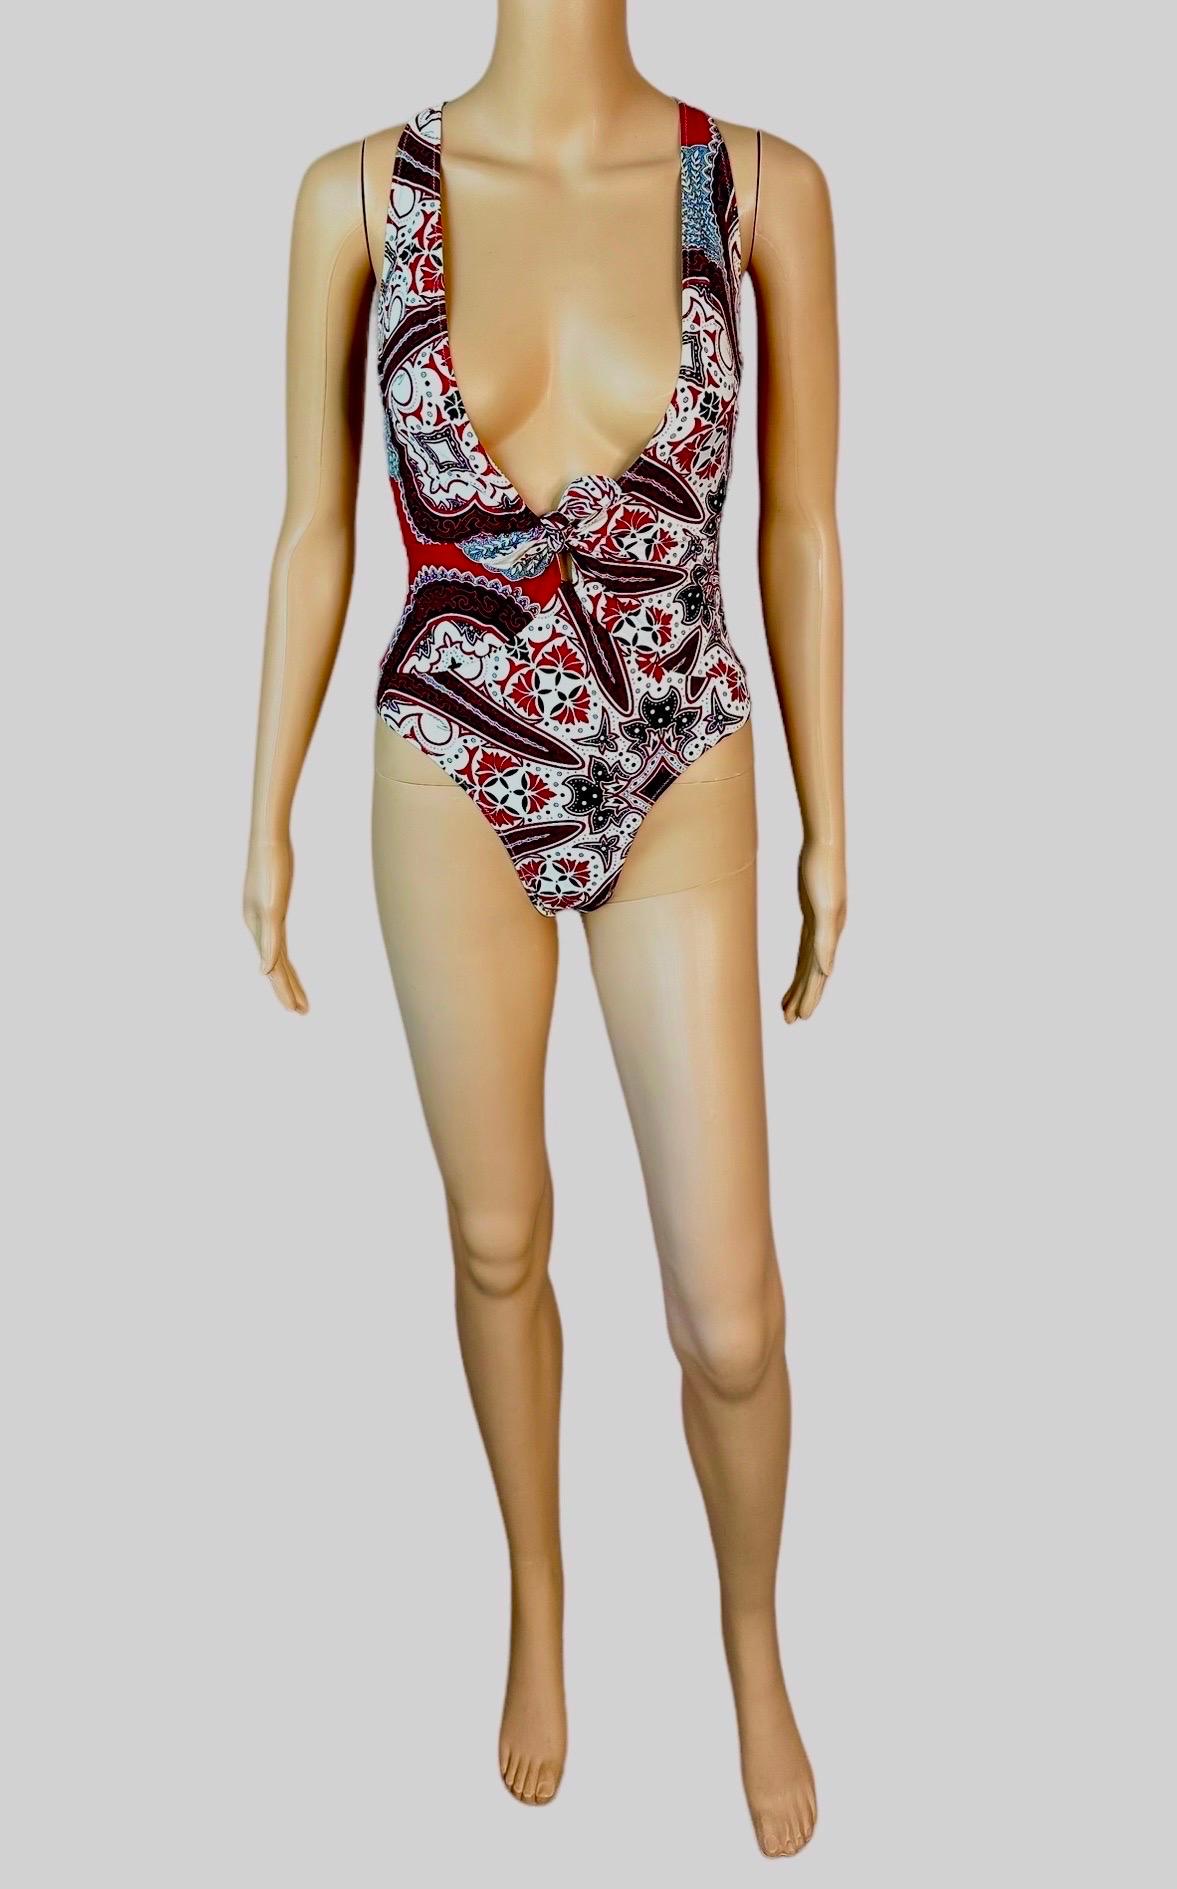 Tom Ford for Gucci Cruise 2004 Unworn One Piece Bodysuit Swimsuit Swimwear  For Sale 6